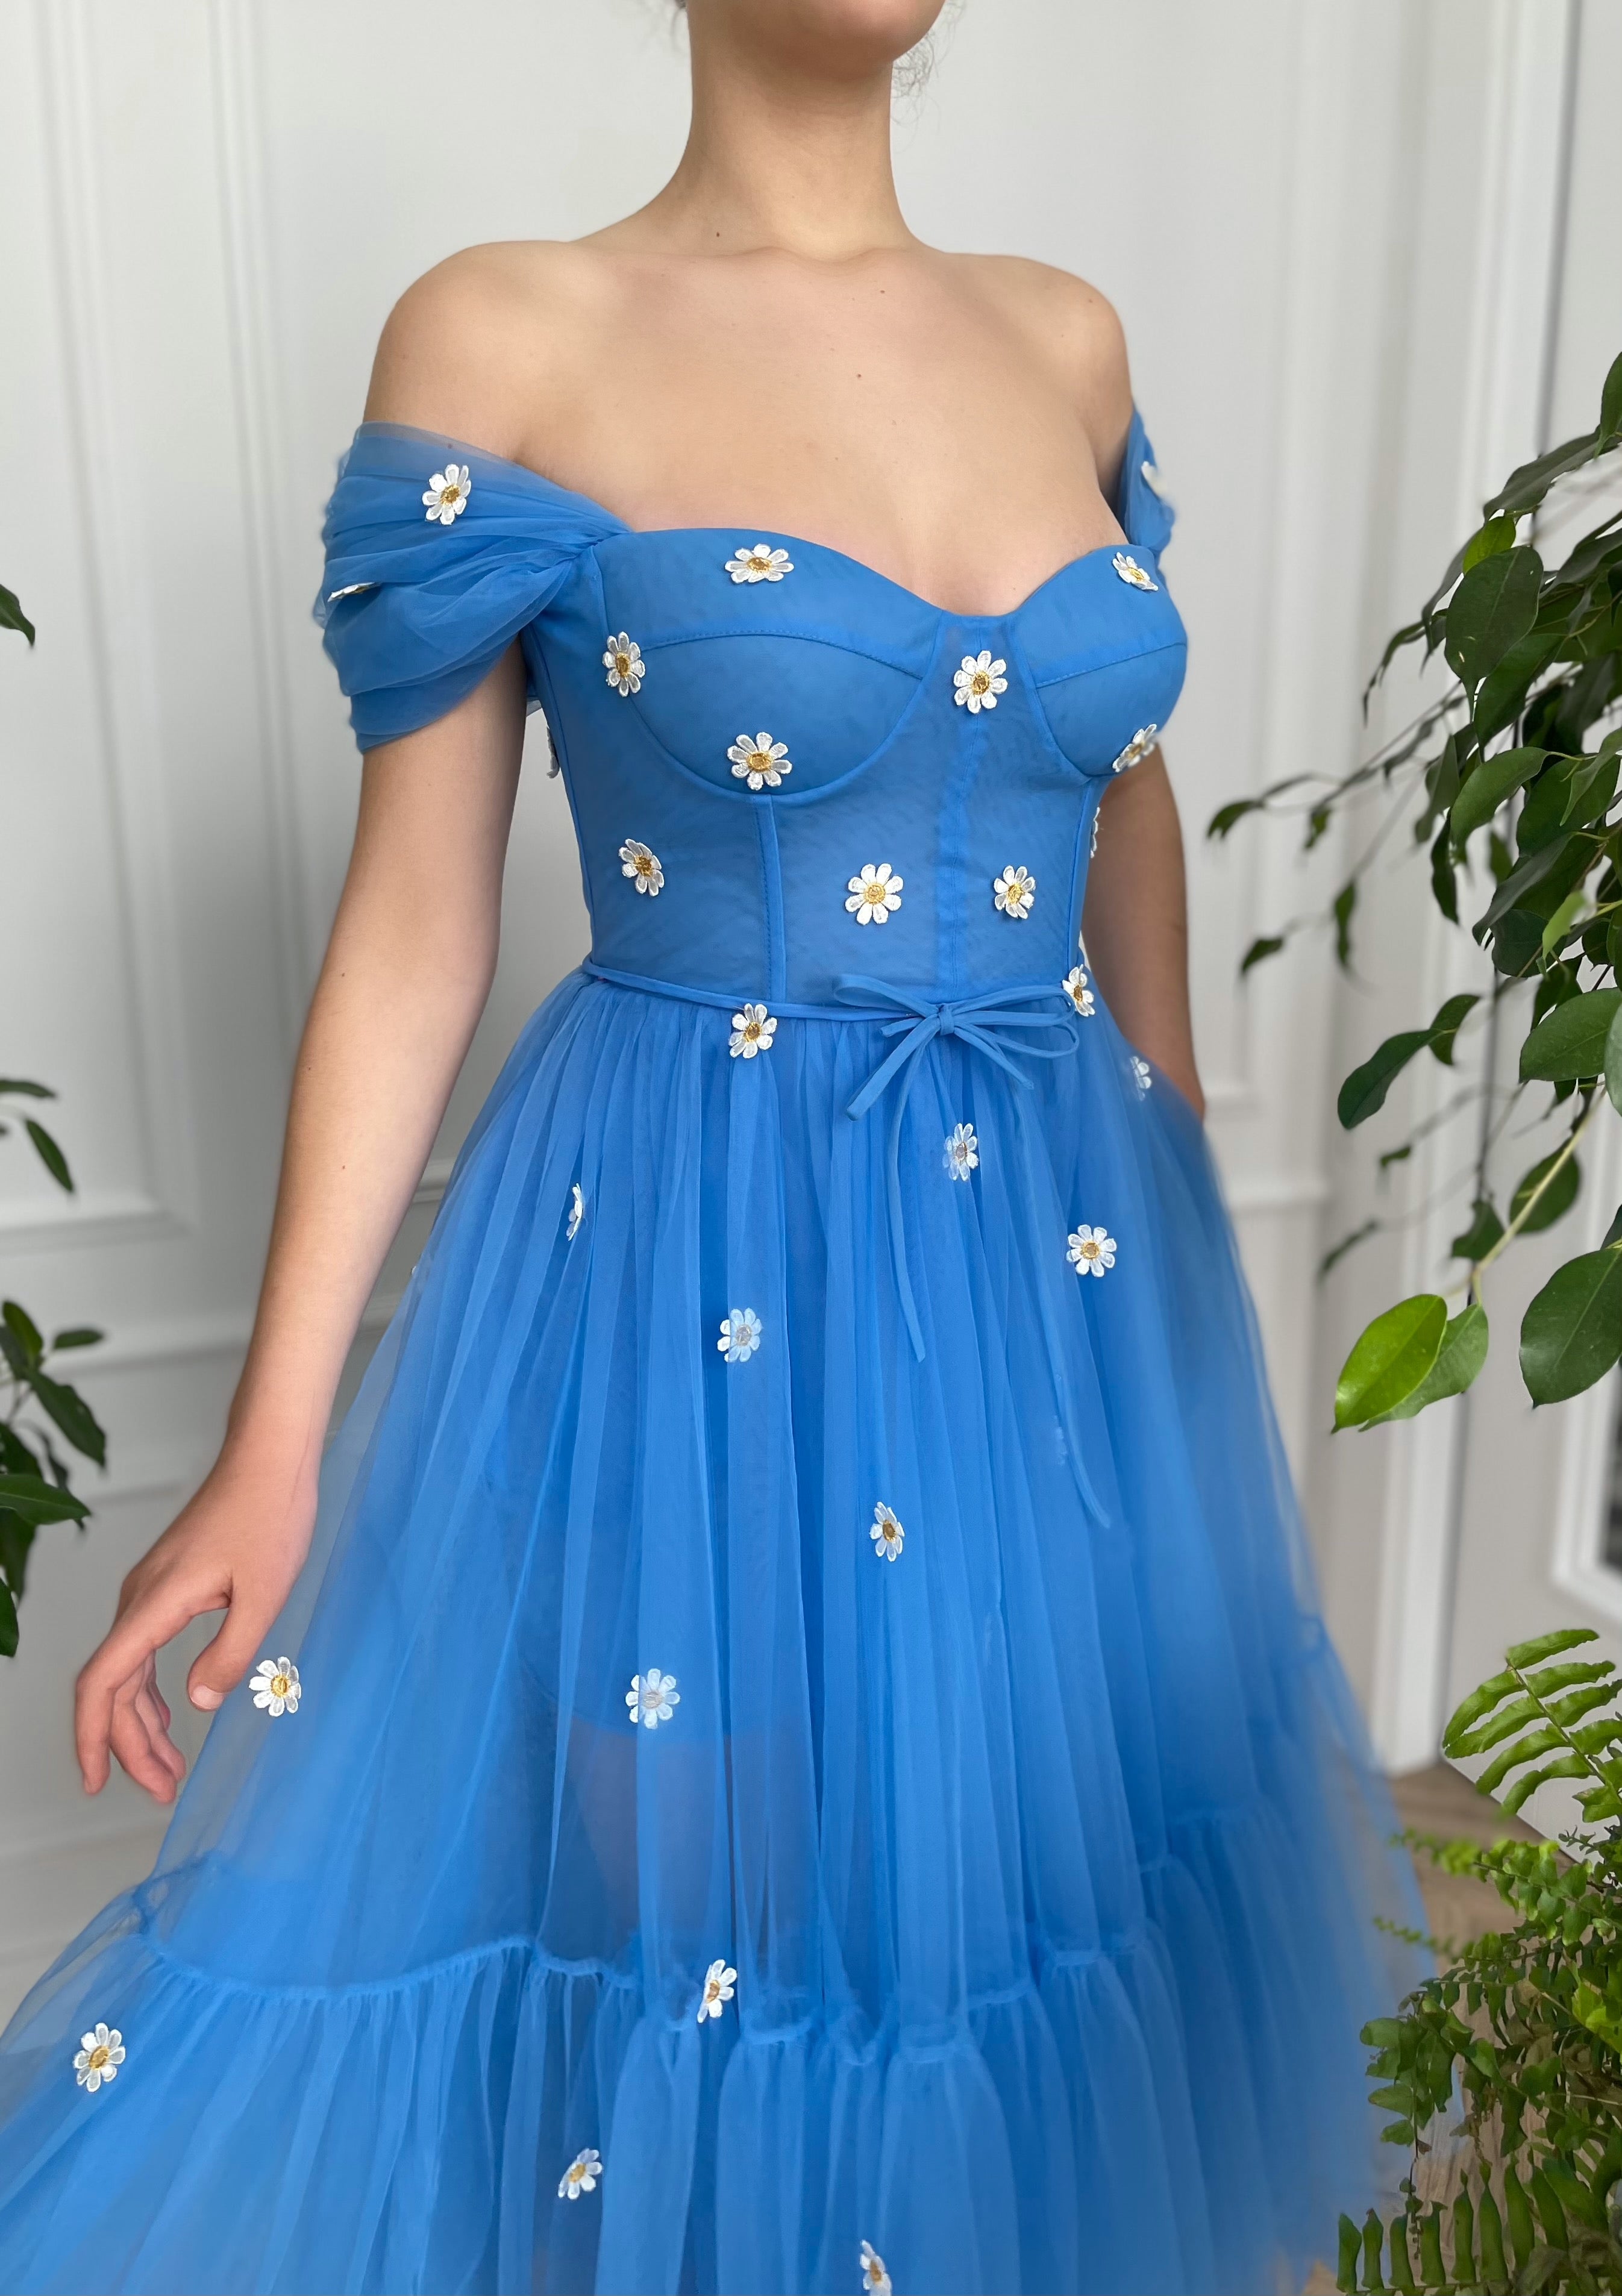 Blue midi dress with off the shoulder sleeves and embroidered daisies